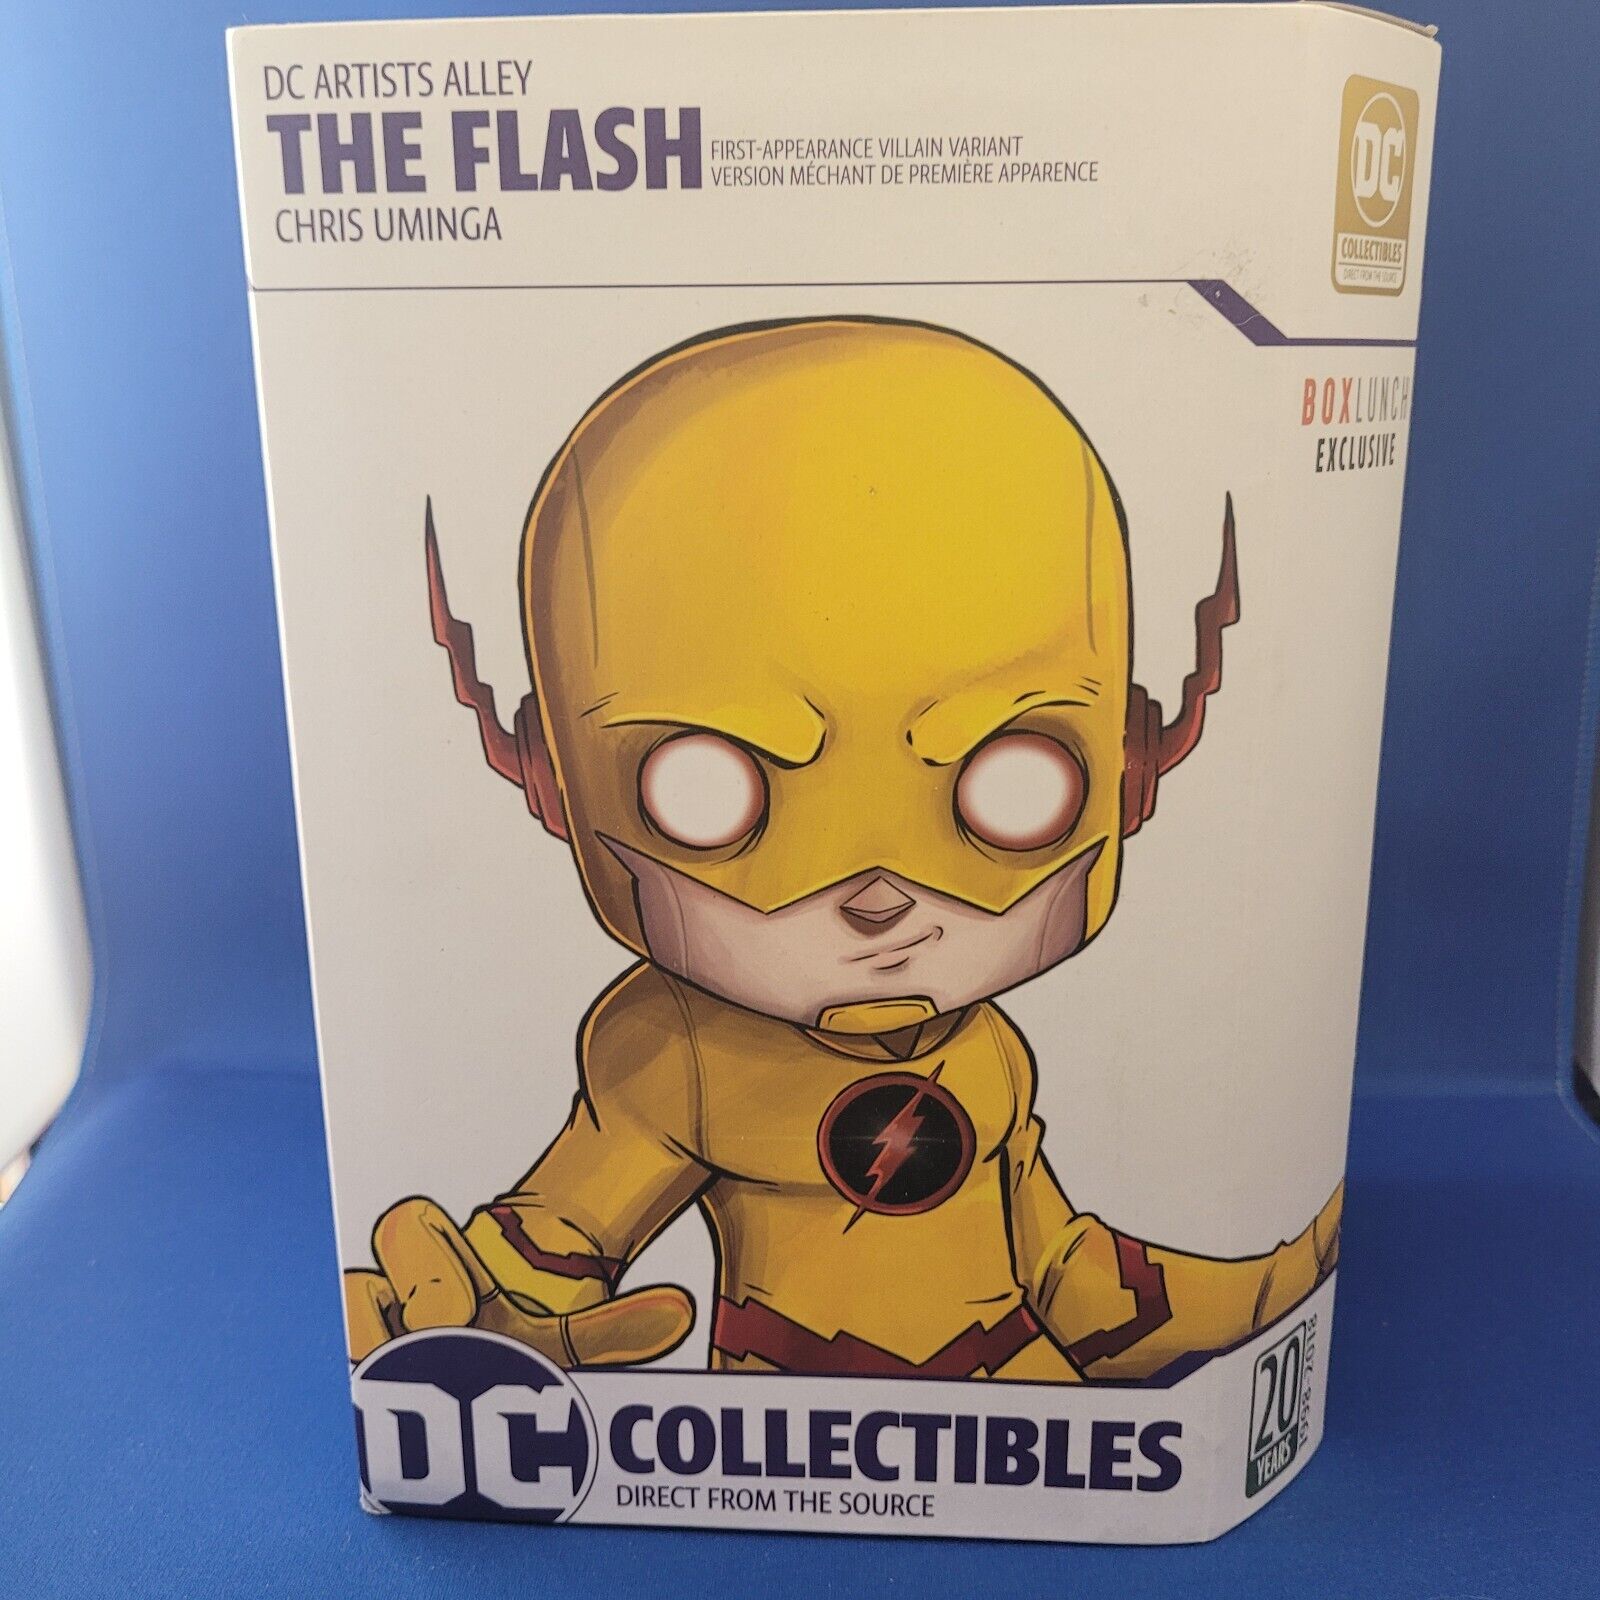 DC COMICS ARTISTS ALLEY CHRIS UMINGA - THE FLASH Box Lunch Exclusive 574/1500